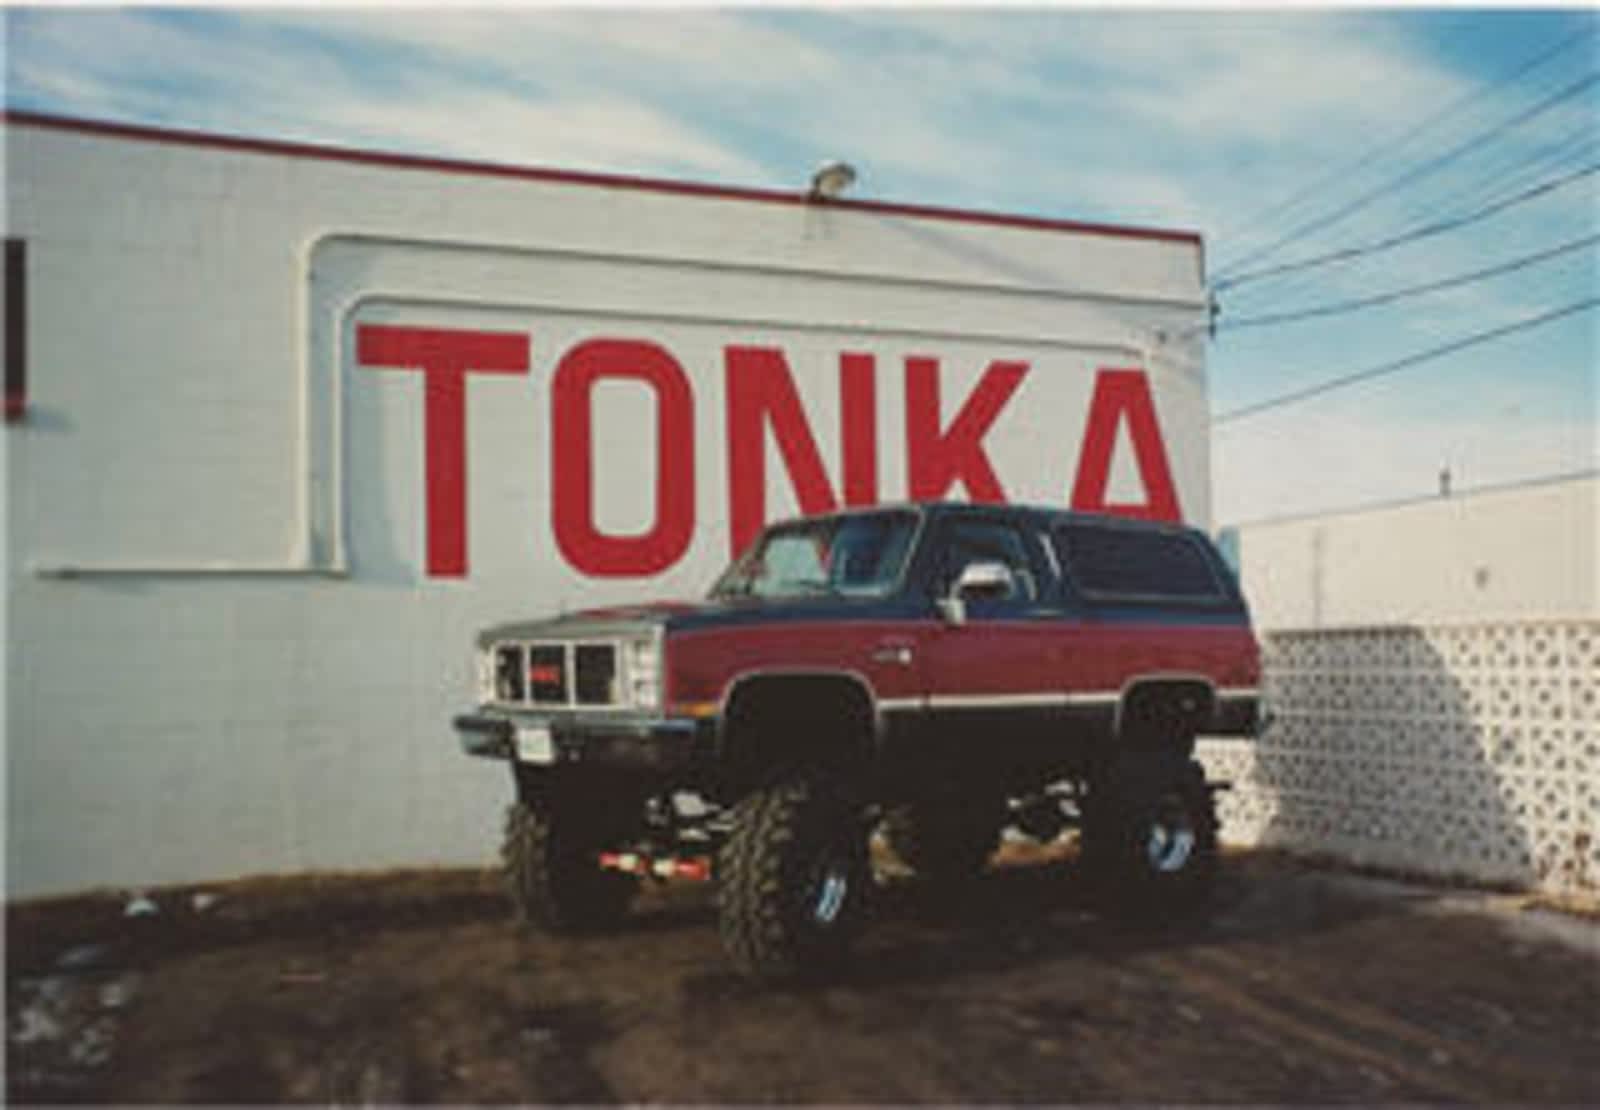 Tonka 4WD - About Us